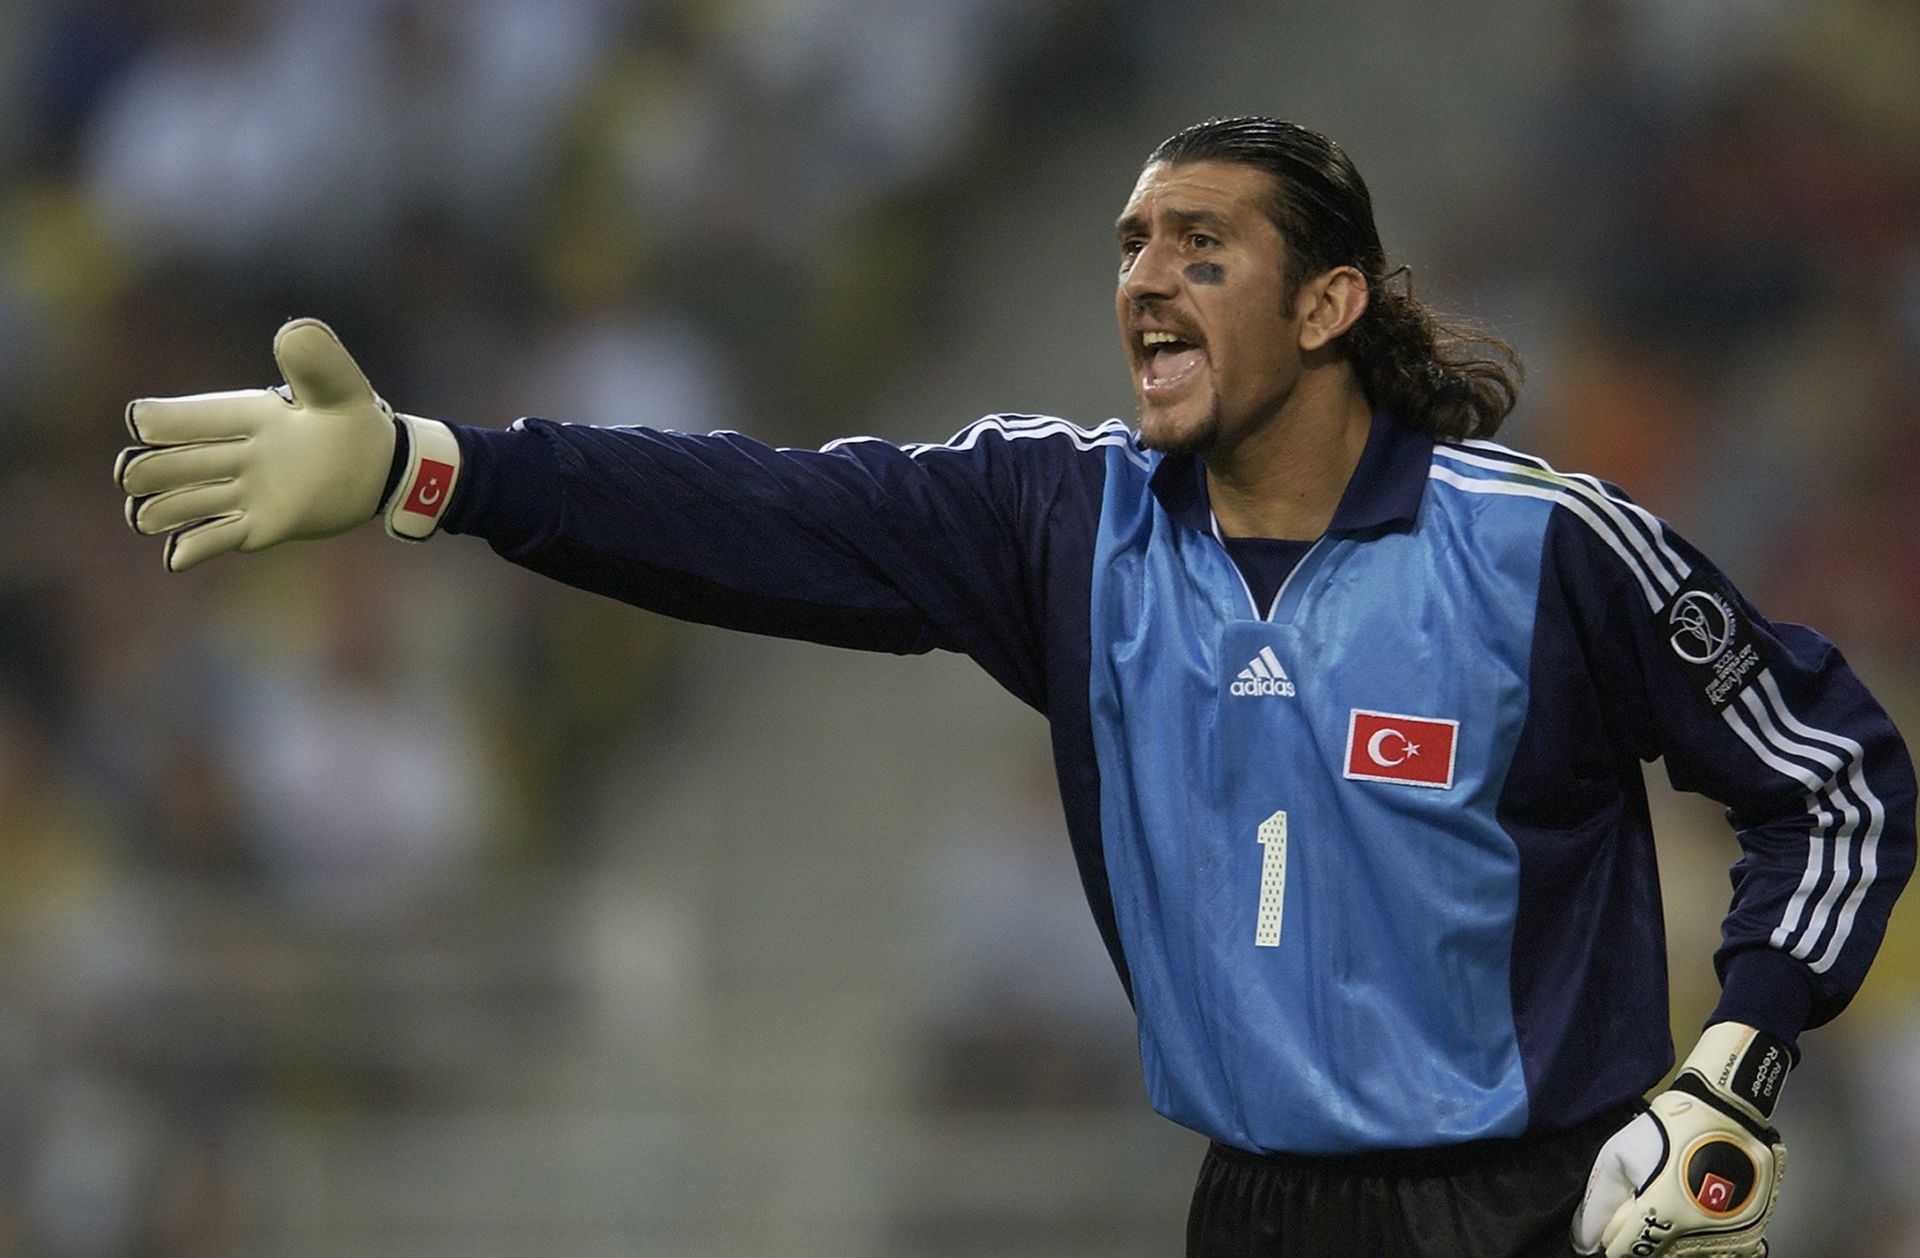 <p>                     Rustu Recber played 120 times for Turkey between 1994 and 2012 and was one of two goalkeepers in the 16-man team of the tournament at the 2002 World Cup, alongside Germany's Oliver Kahn.                   </p>                                      <p>                     Rustu had helped Turkey to third place in Japan and Korea. He was named as the best goalkeeper in European competitions that same year and Pele included him in his list of the greatest living footballers in 2004.                   </p>